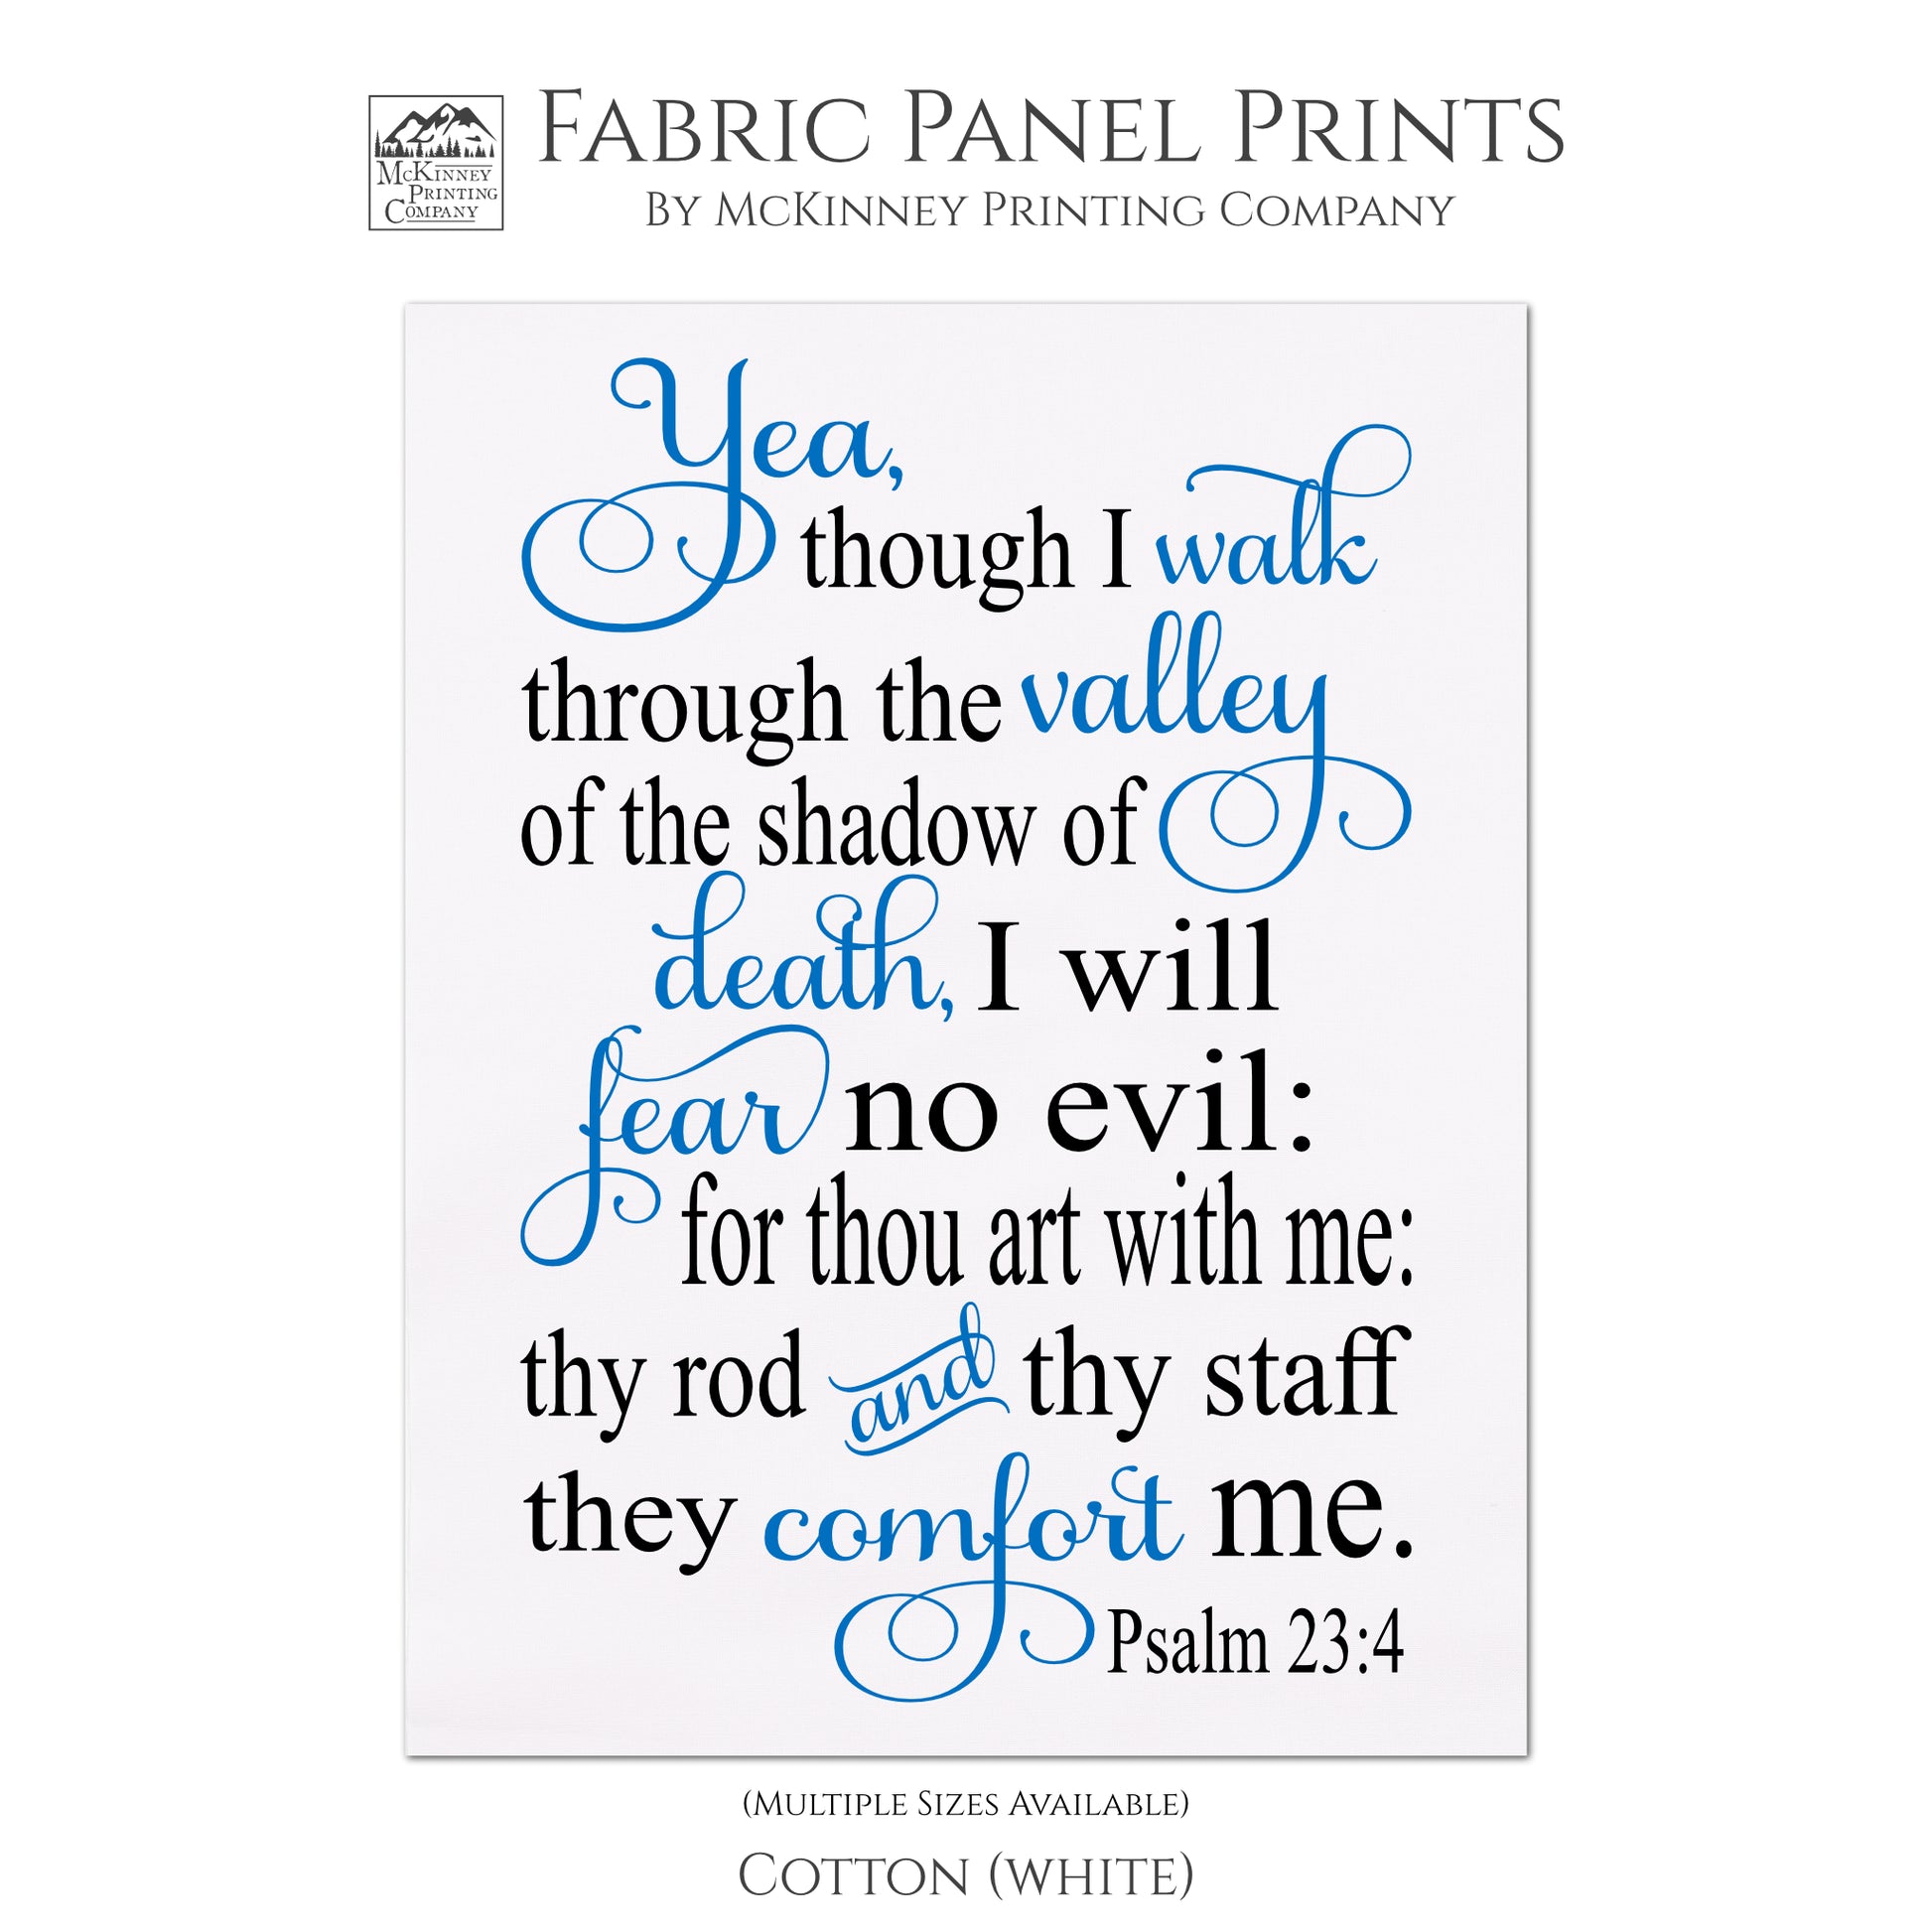 Yea, though I walk through the valley of the shadow of death, I will fear no evil: for thou art with me: they rod and they staff they comfort me - Psalm 23:4 - Scripture Fabric, Panel, Quilt Block - Cotton, White